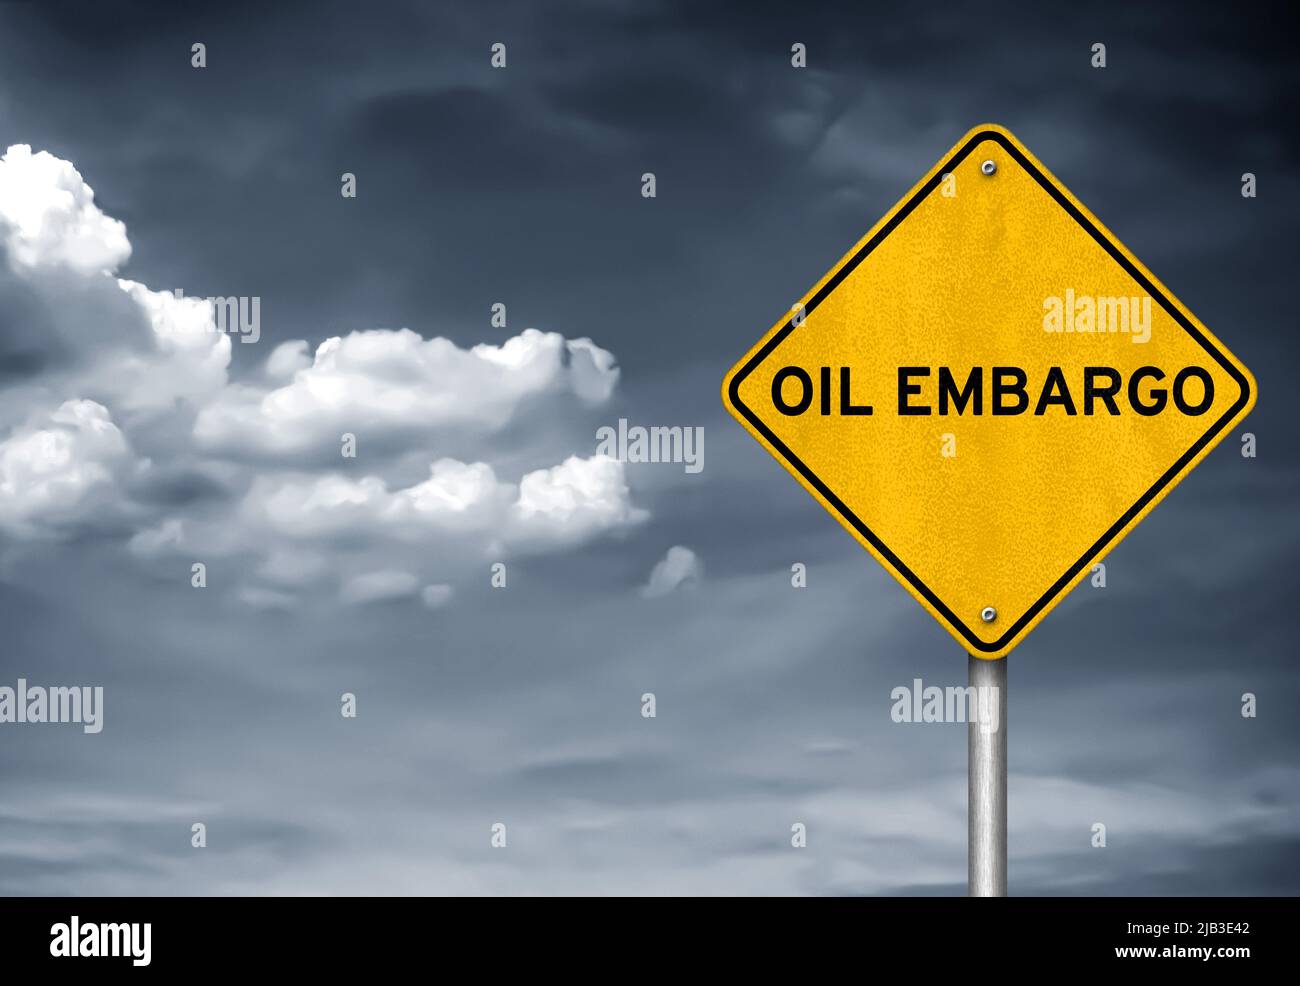 Oil Embargo - Road sign warning Stock Photo